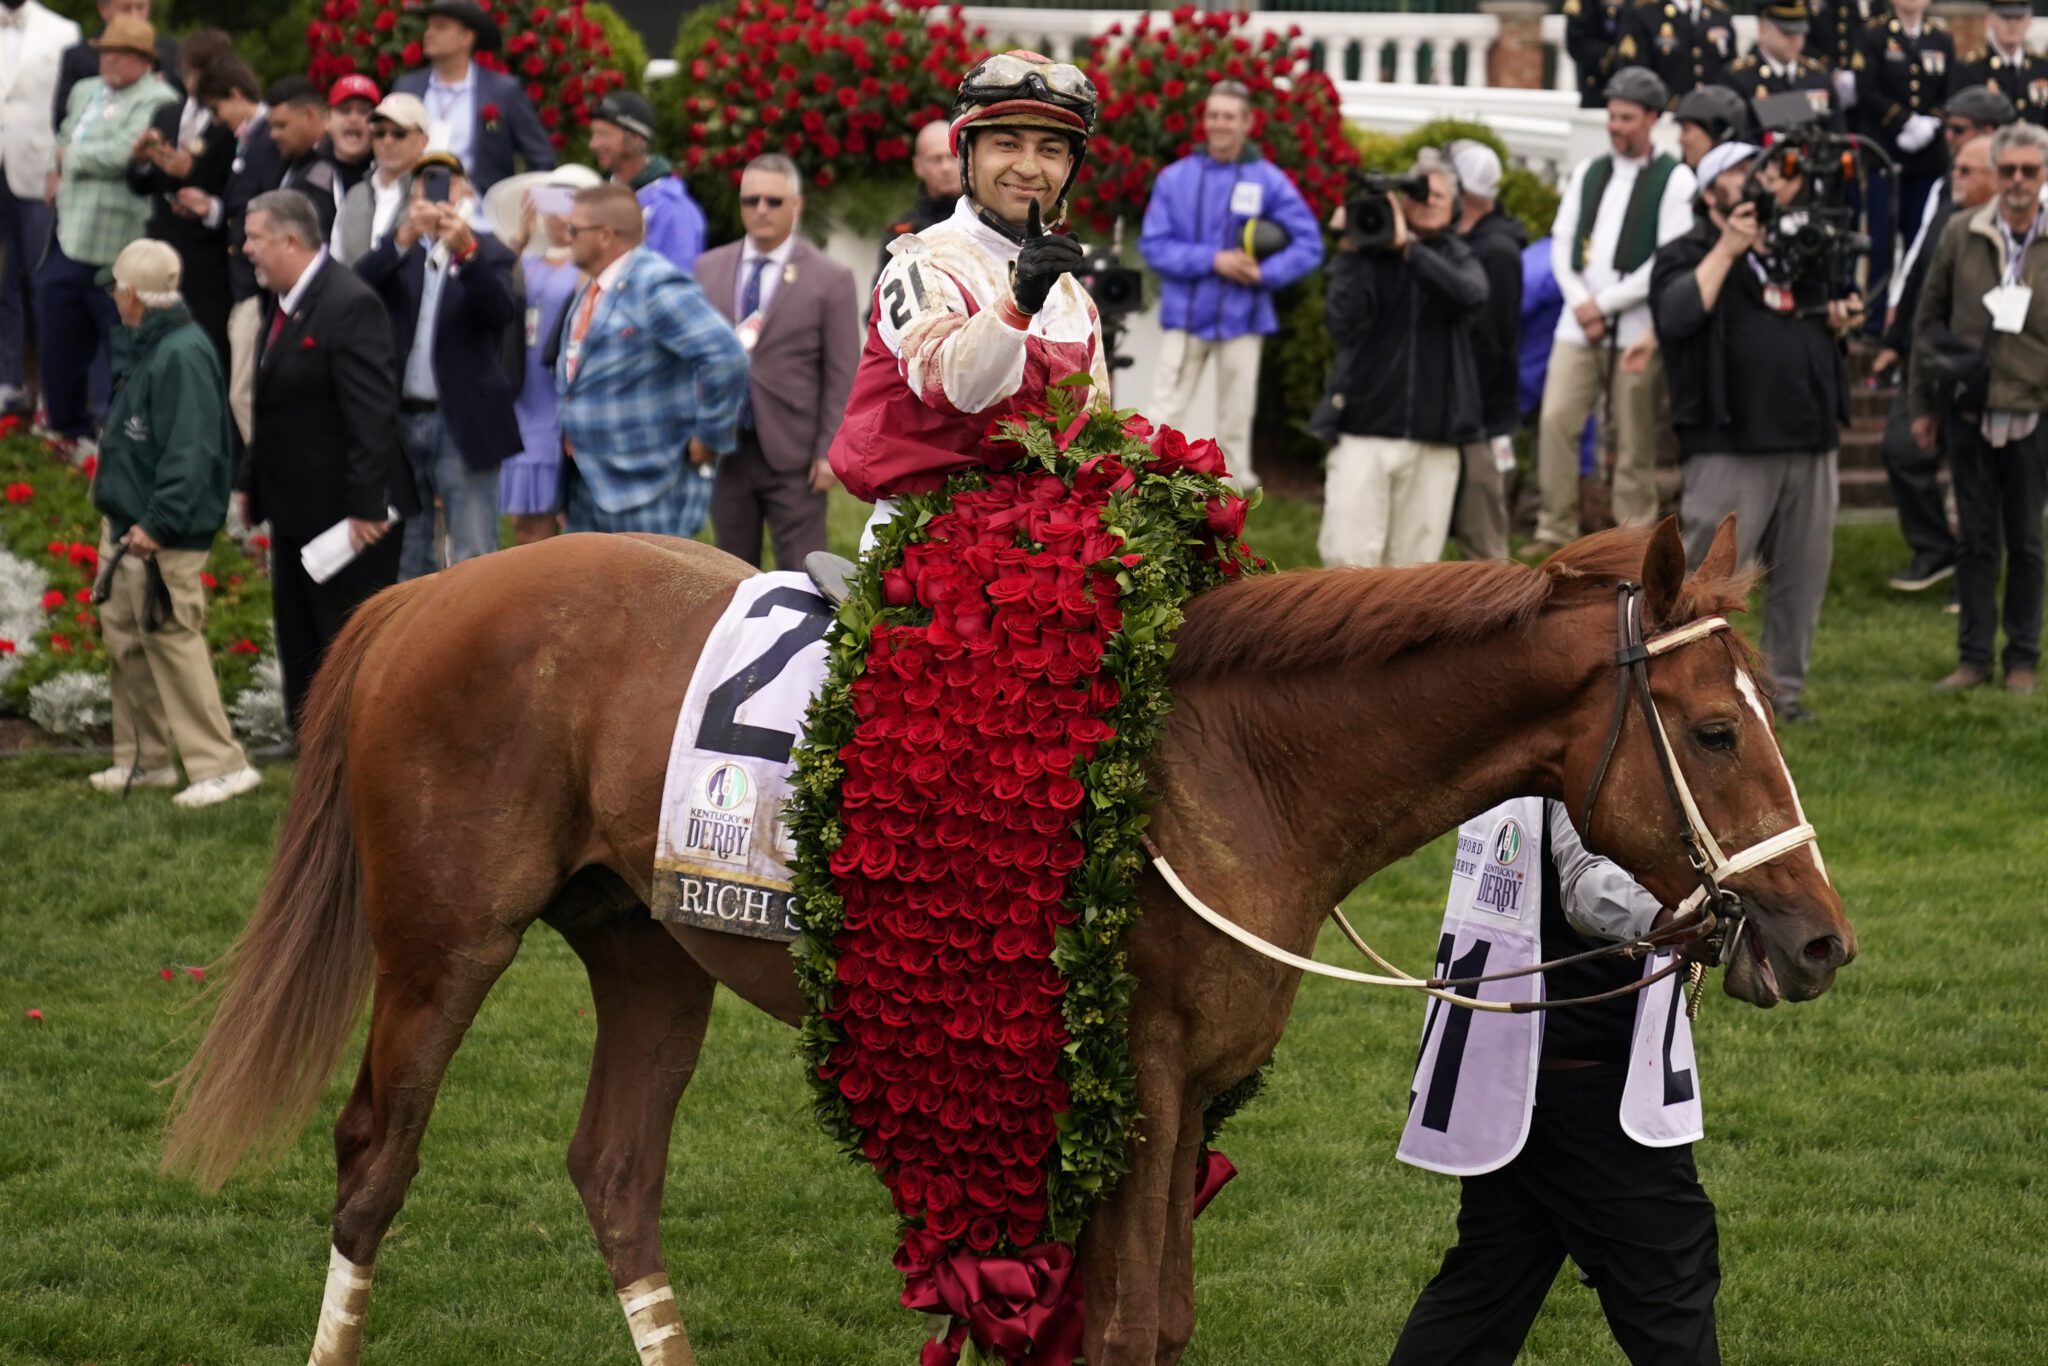 Sonny Leon rides Rich Strike in the winner's circle after winning the 148th running of the Kentucky Derby horse race at Churchill Downs Saturday, May 7, 2022, in Louisville, Ky. (AP Photo/Jeff Roberson)